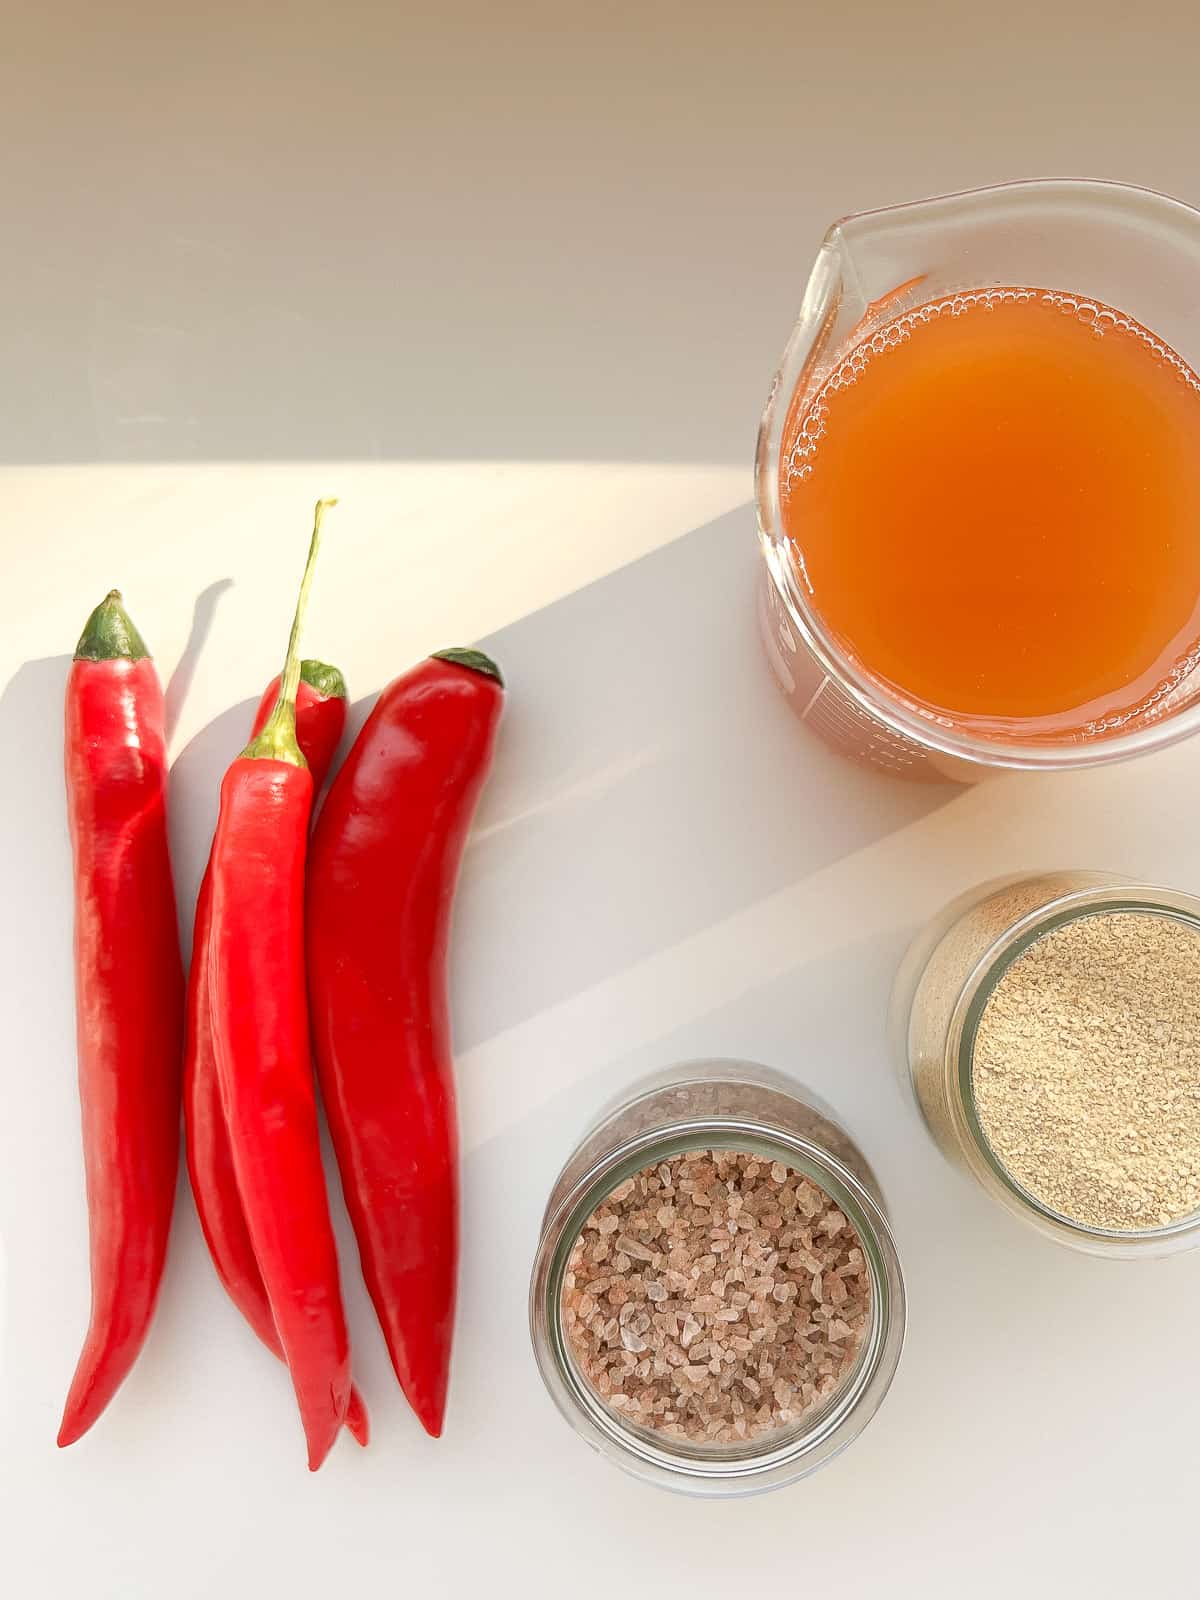 An image of the ingredients needs to make pickled hot peppers.